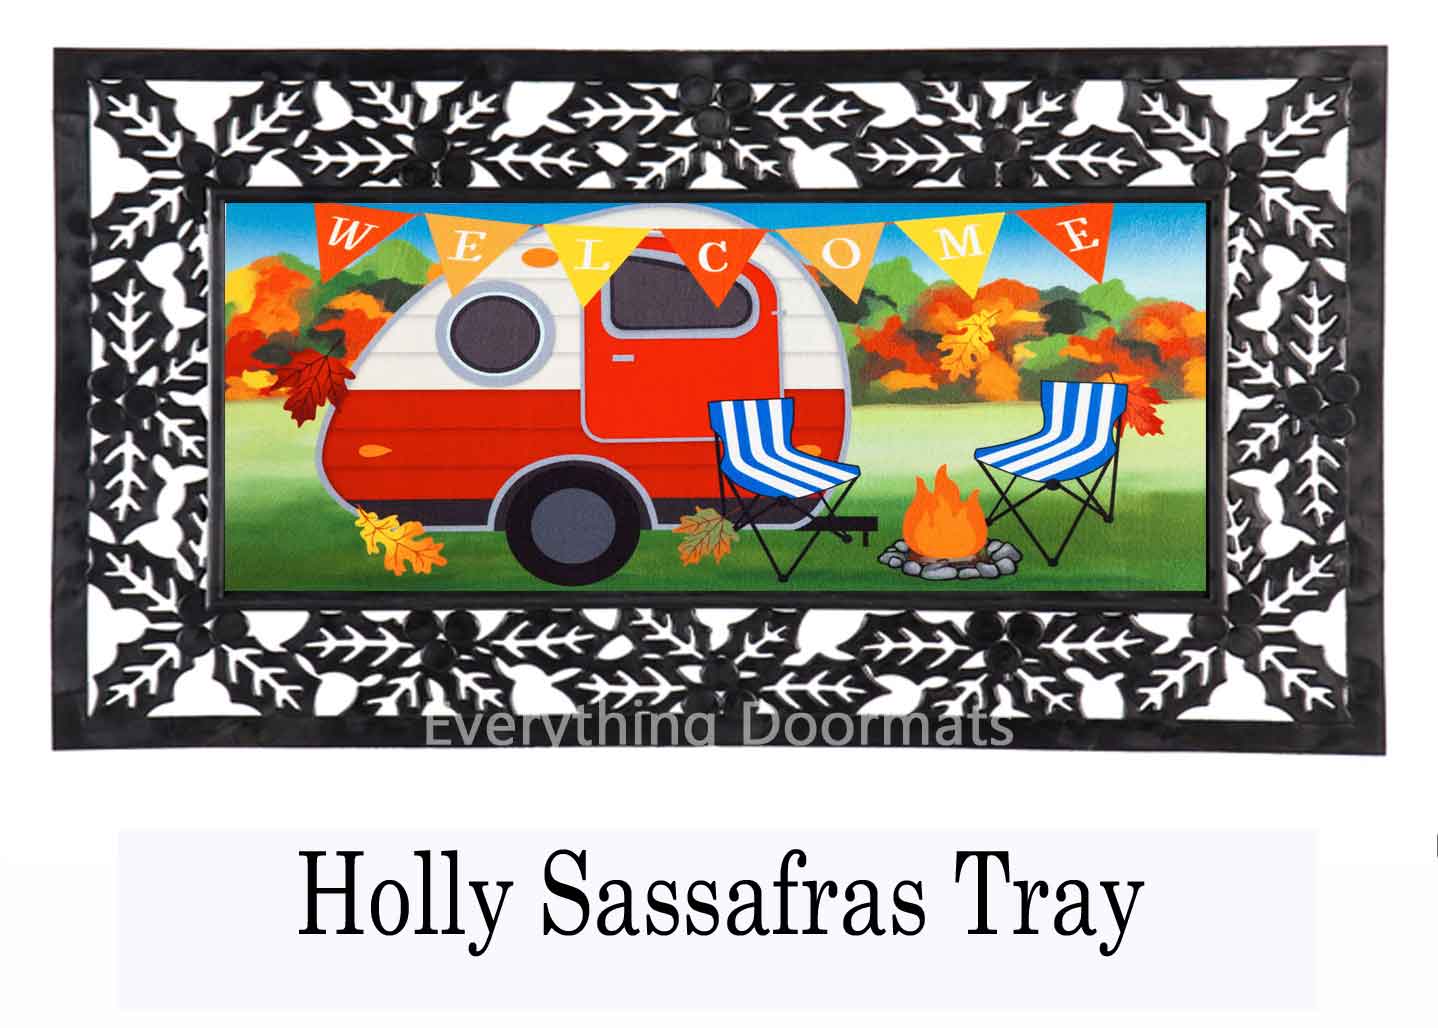 https://www.everythingdoormats.com/images/products/fall-camper-welcome-sassafras-switch-insert-doormat-in-holly-rubber-tray.jpg